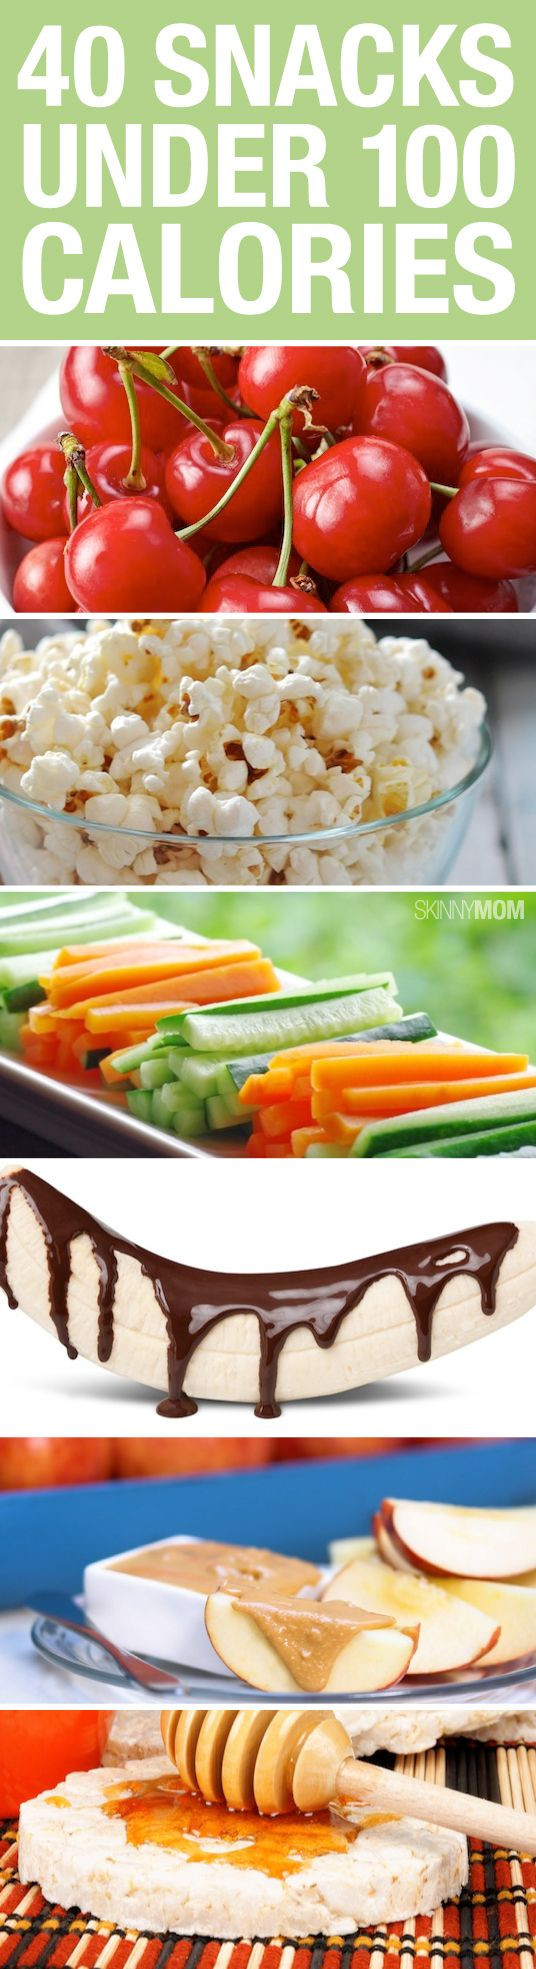 100 Calorie Low Carb Snacks
 The 39 Best Tasting Snacks Less Than 100 Calories